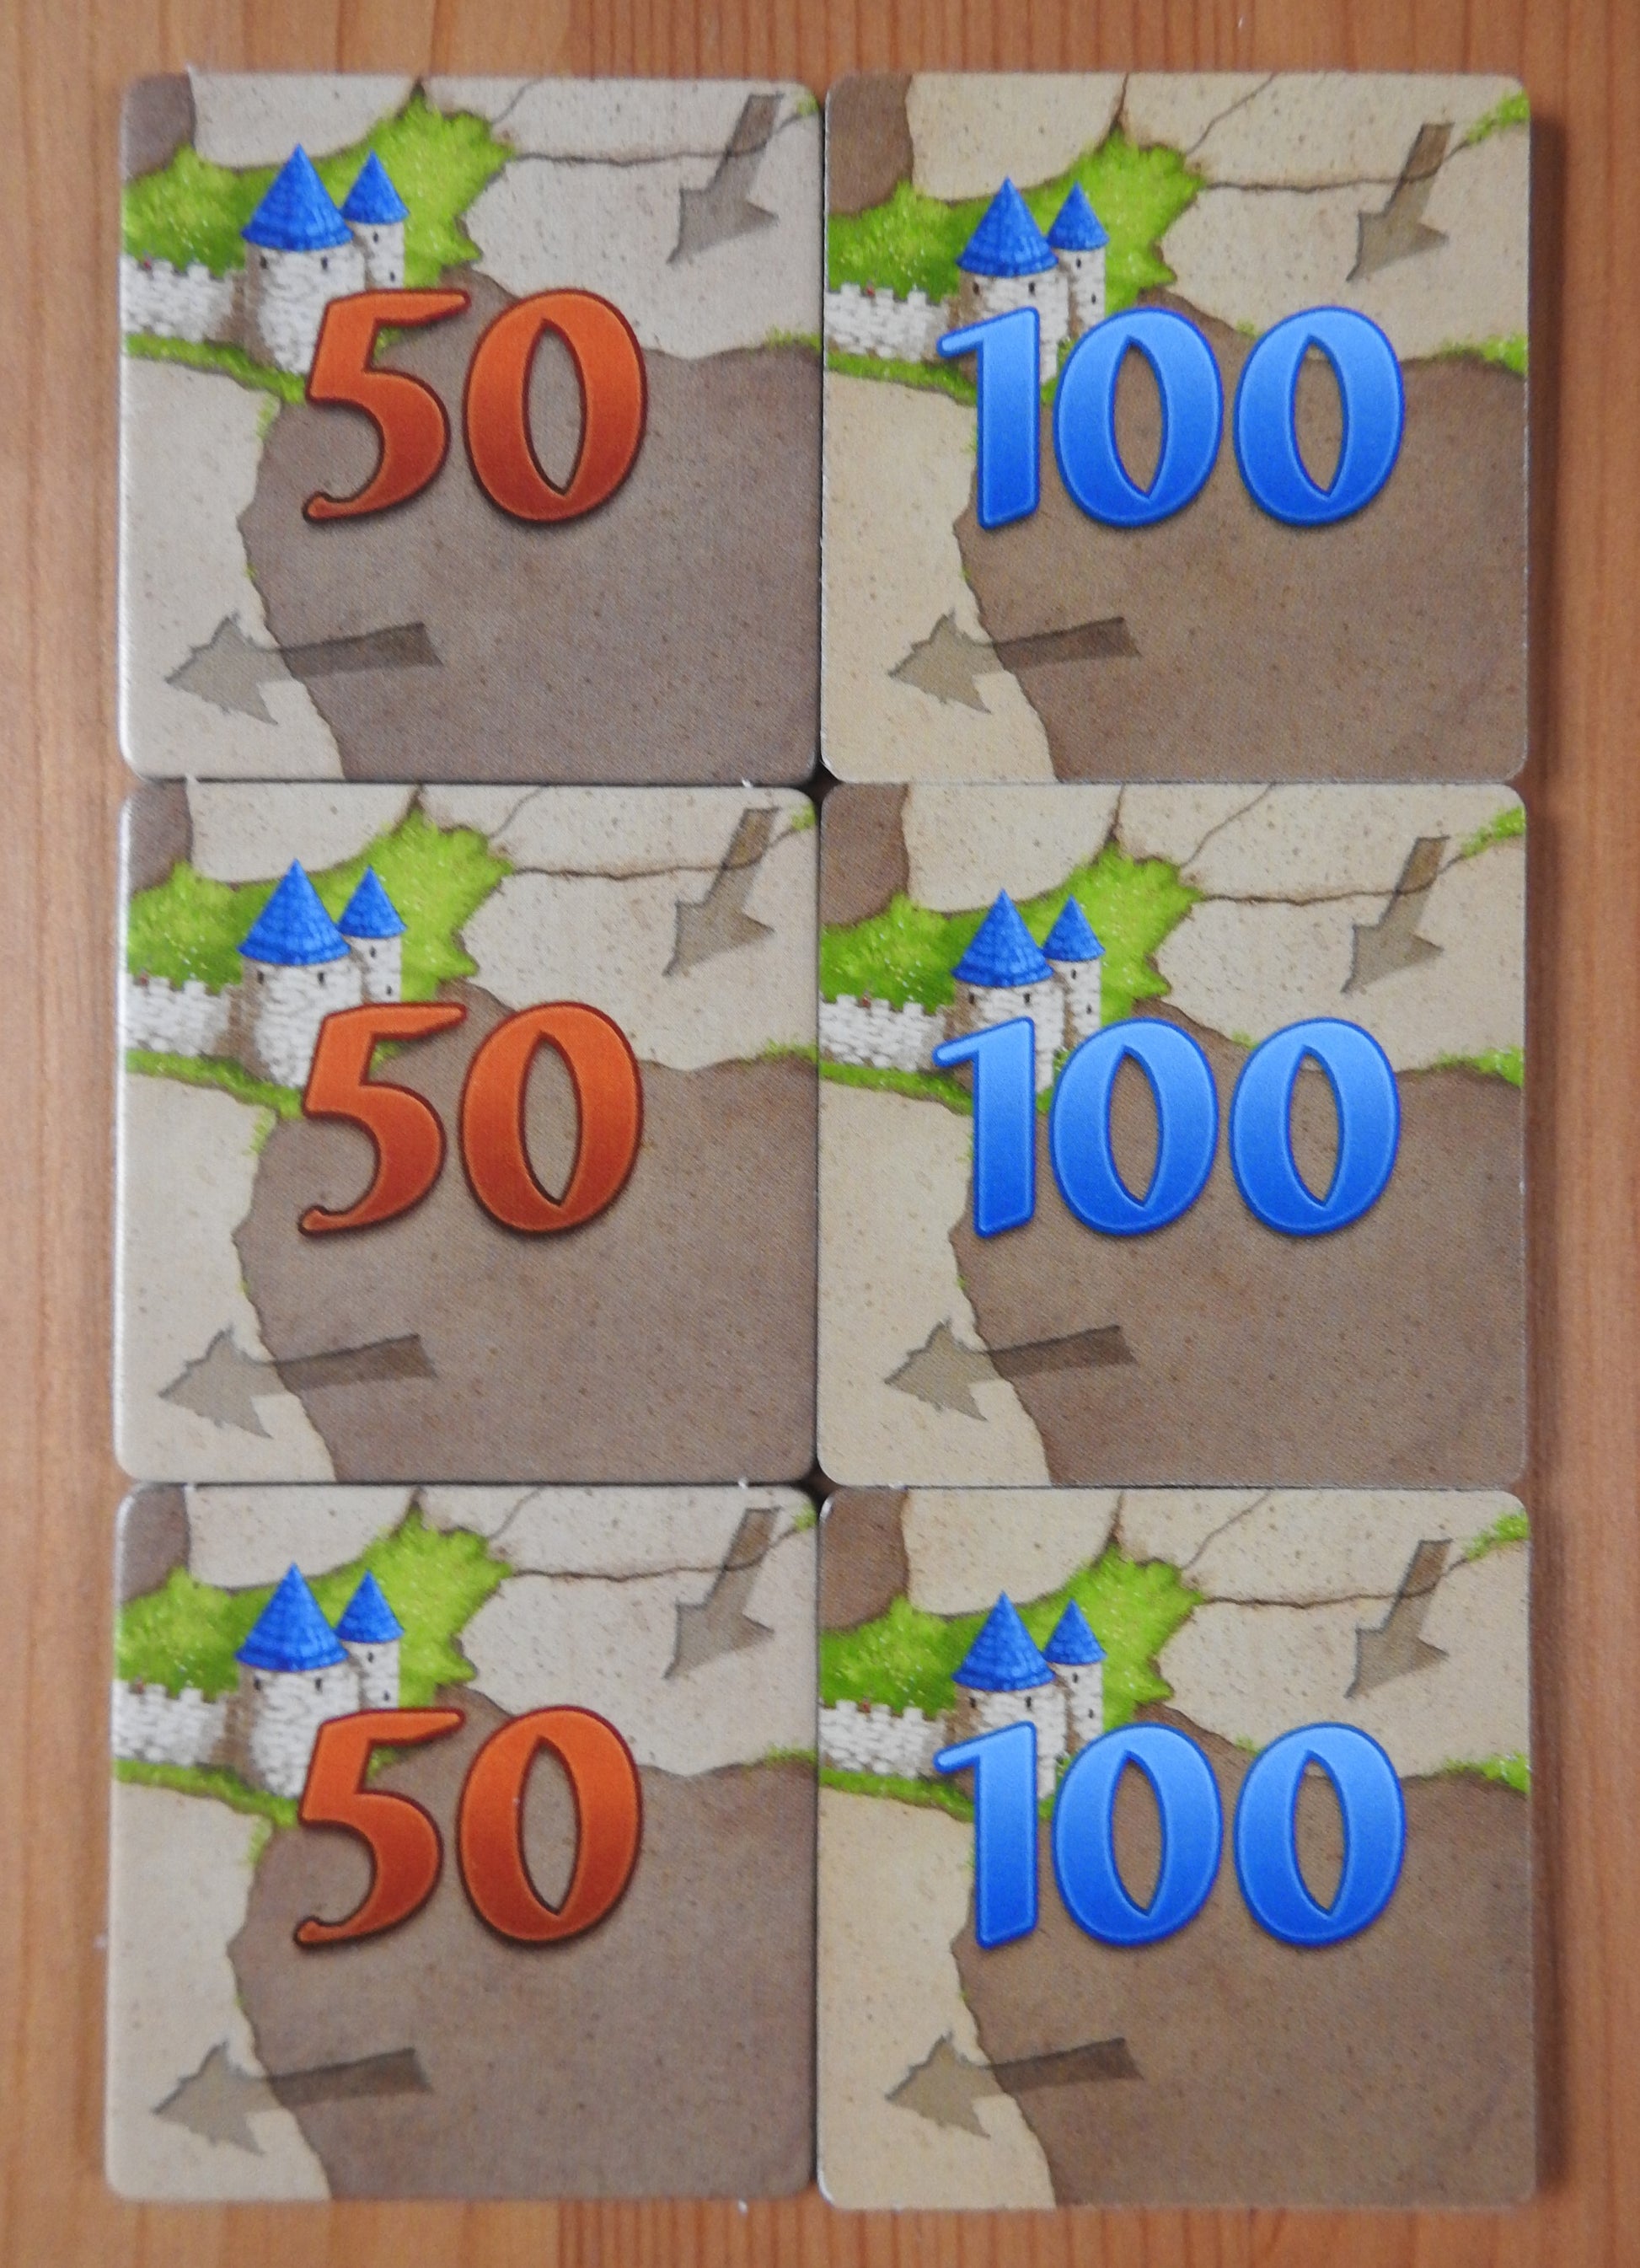 View of all 6 of the tiles that comes with this 6 Extra Scoring Tiles accessory for Carcassonne.